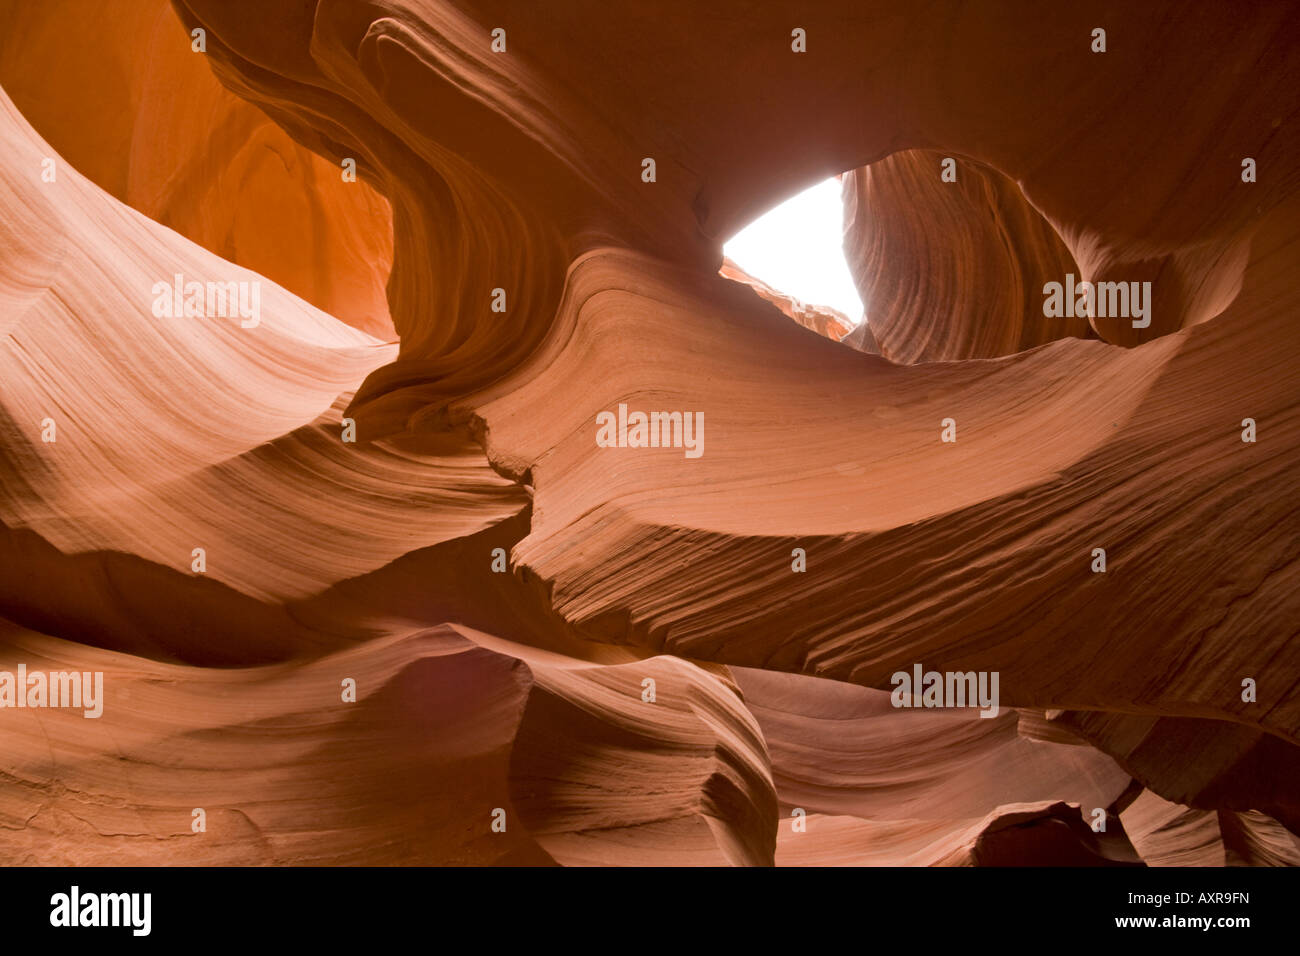 Antelope Canyon Banque D'Images